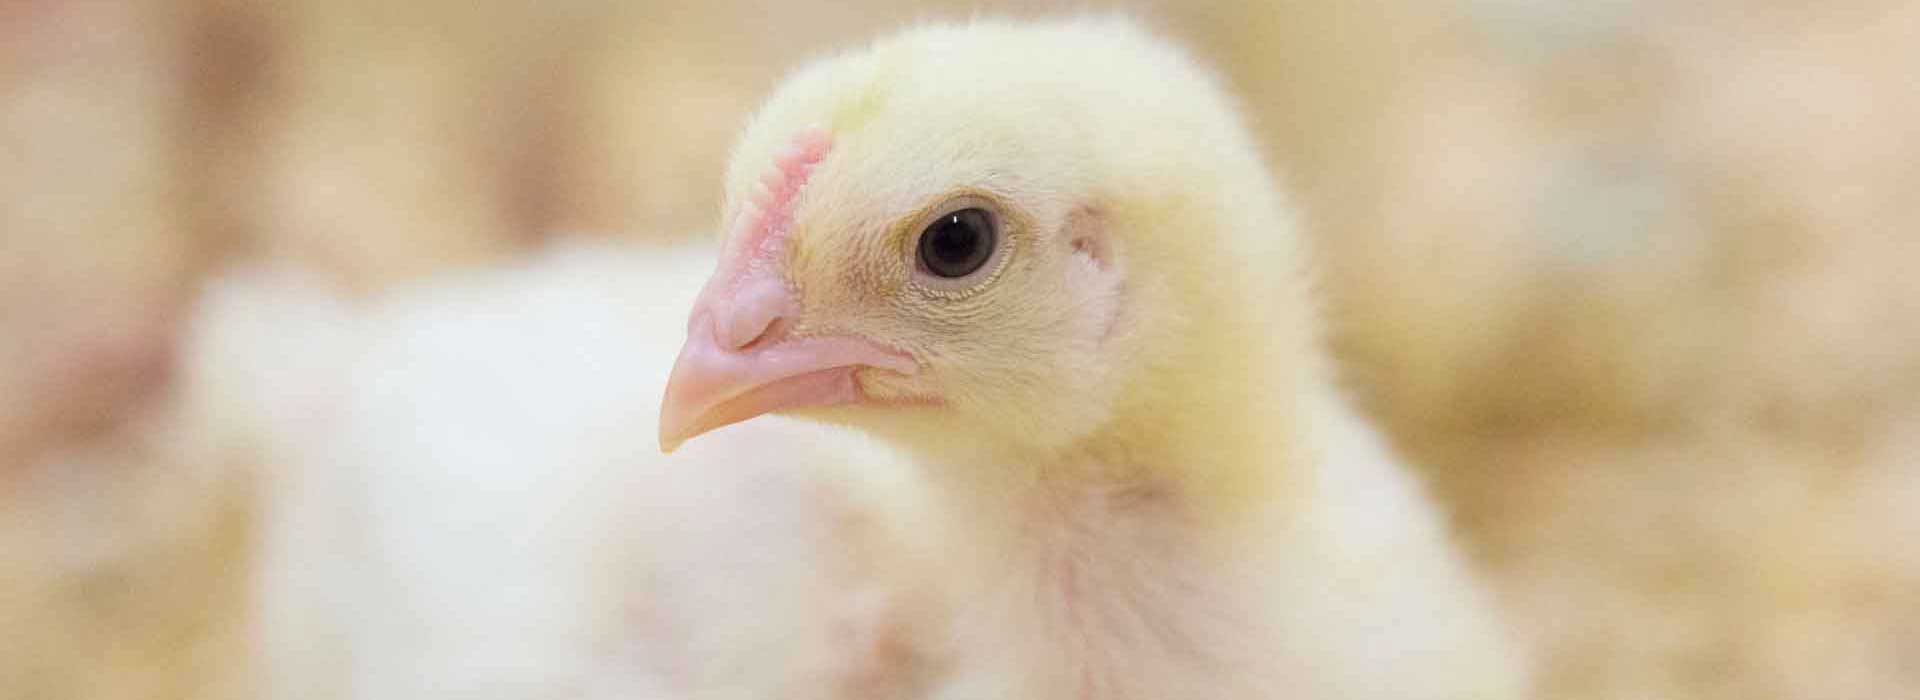 Poultry, Chickens | Alltech is delivering smarter, sustainable  solutions for agriculture